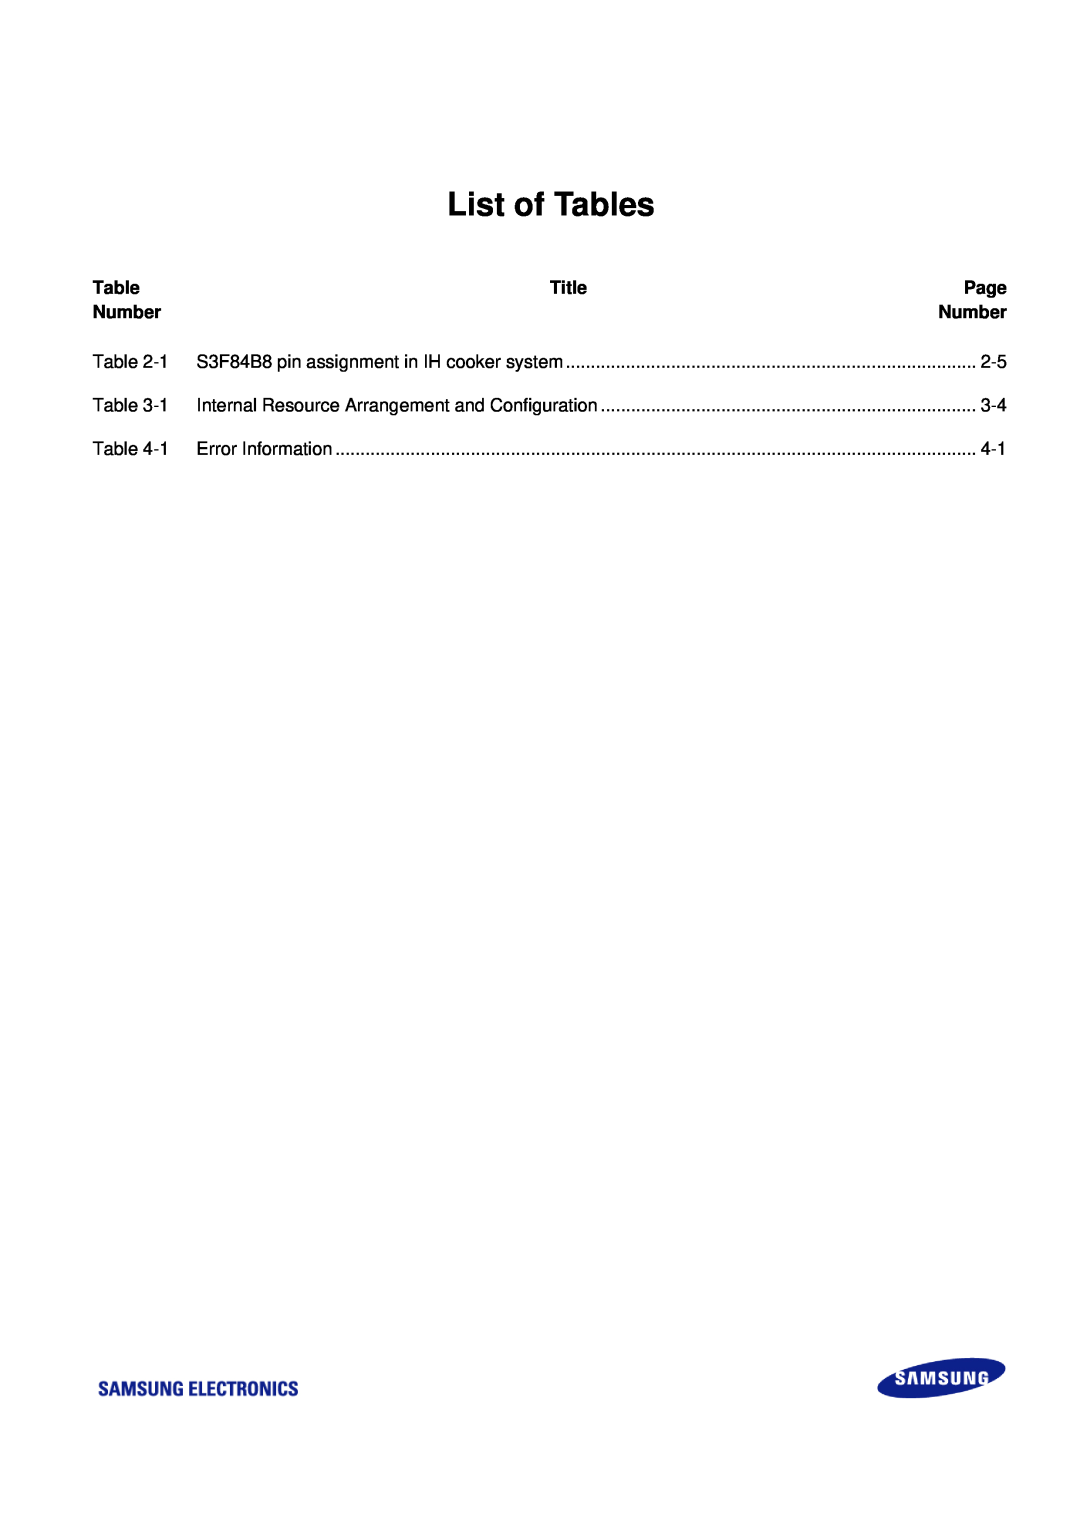 Samsung S3F84B8 manual List of Tables, Title, Page, Number 